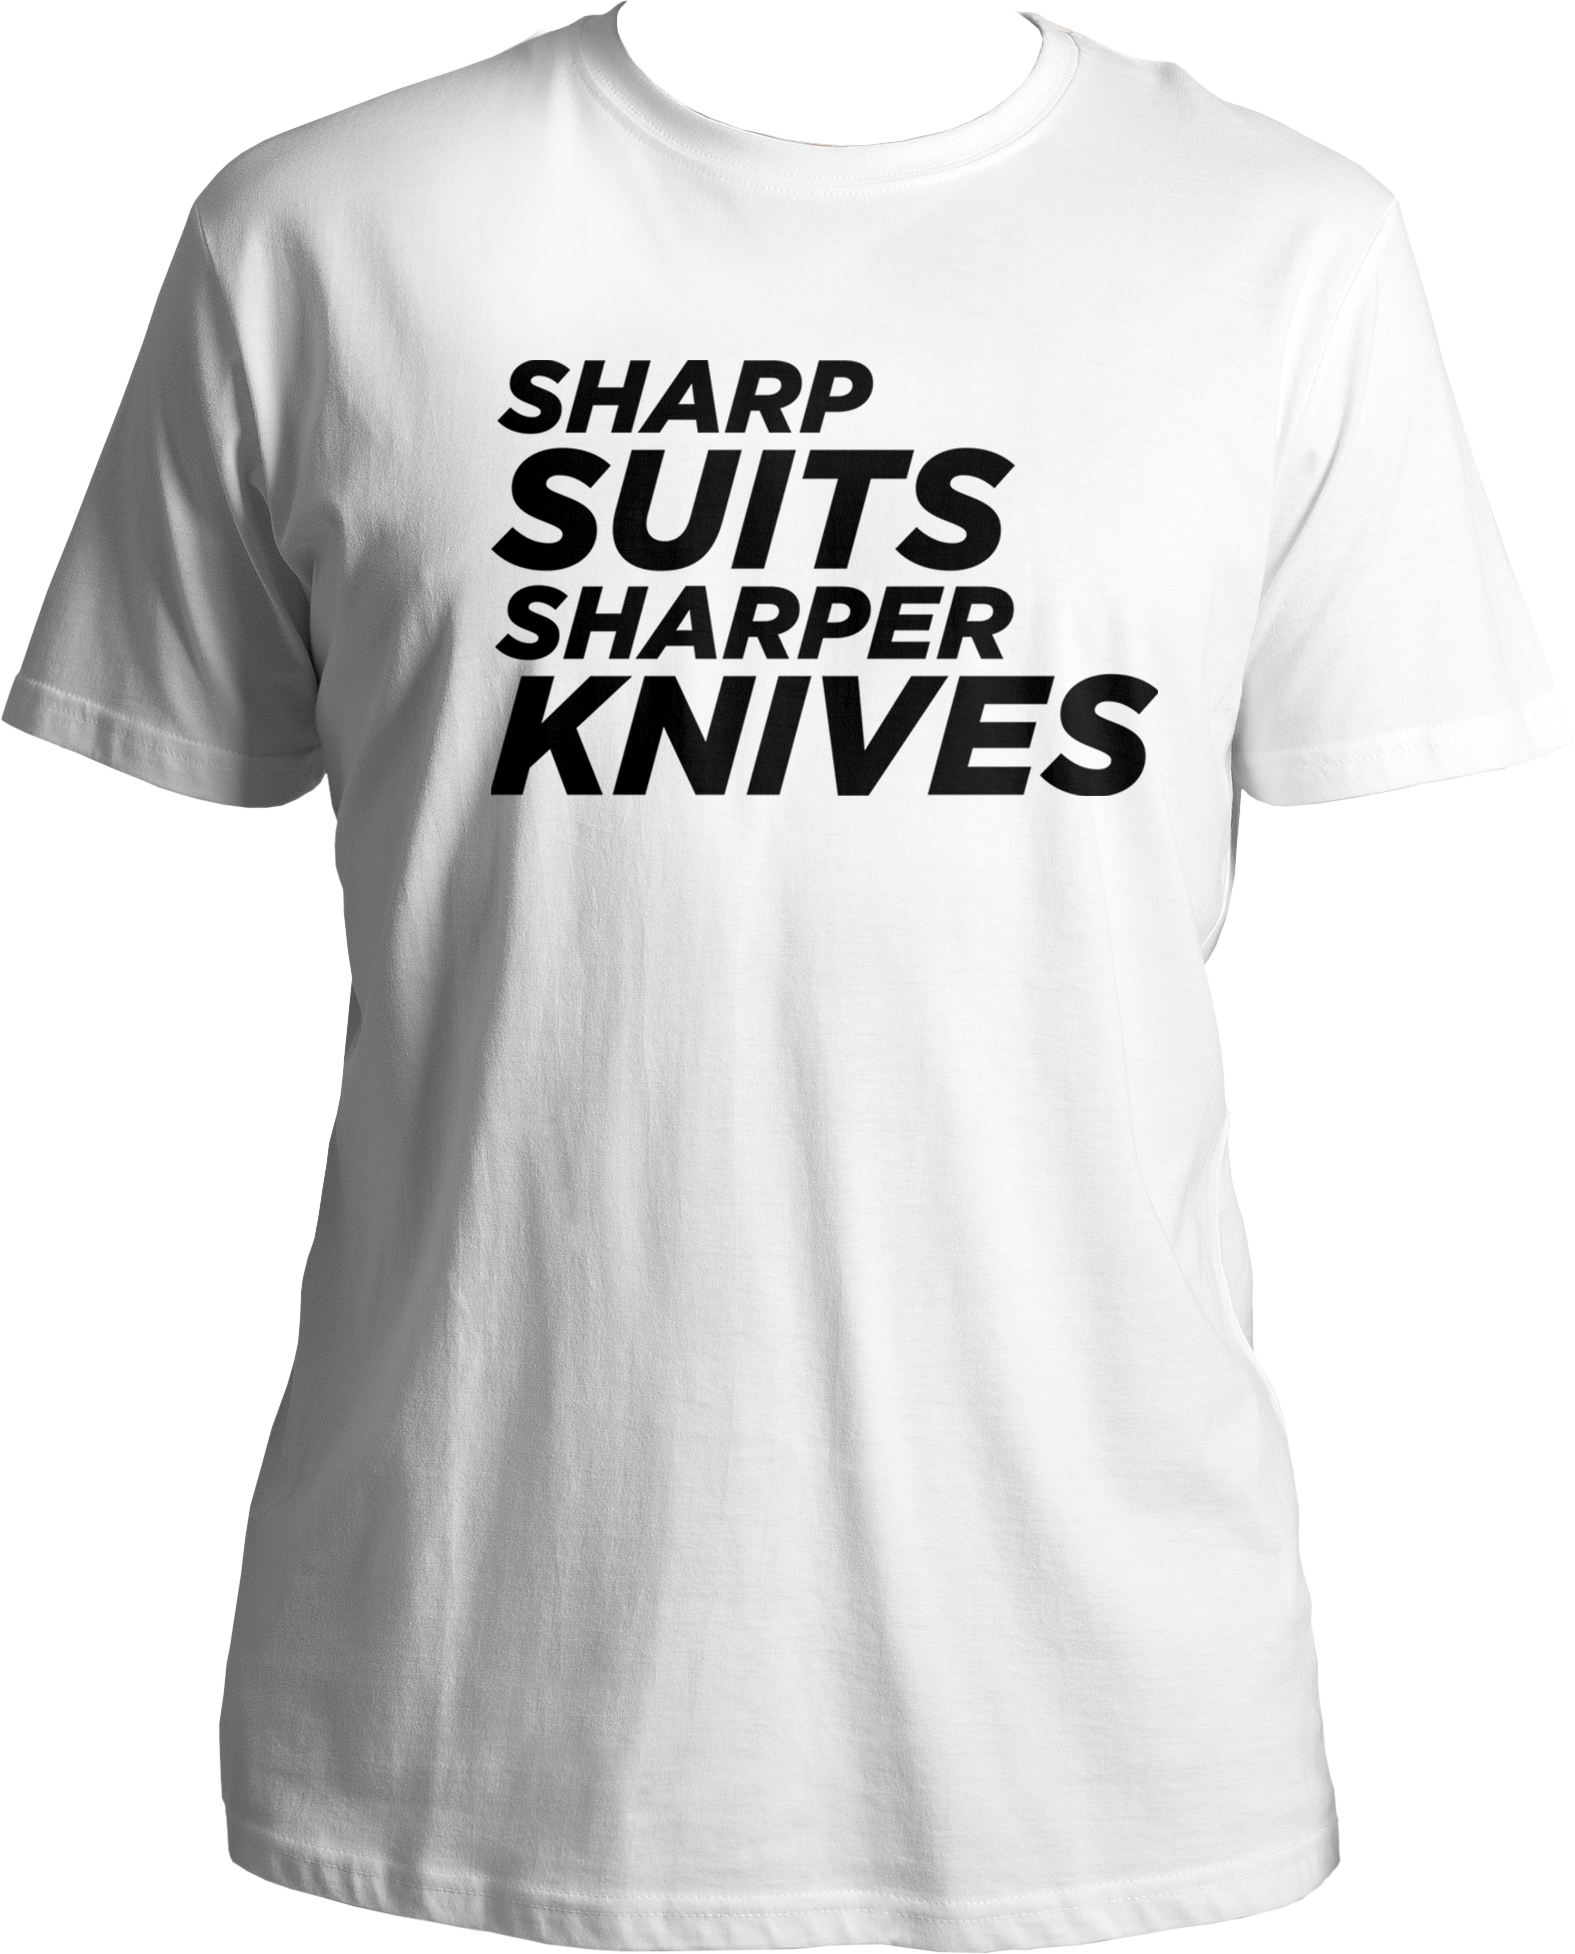 Crafted with comfort and style in mind, our Unisex Cotton Round Neck T-Shirt pays homage to the essence of The Gentlemen. Featuring a sleek design that reads "Sharp Suits Sharper Knives," this tee embodies the show's sophisticated yet edgy vibe. Made from high-quality cotton, it ensures a soft and breathable feel for all-day comfort.